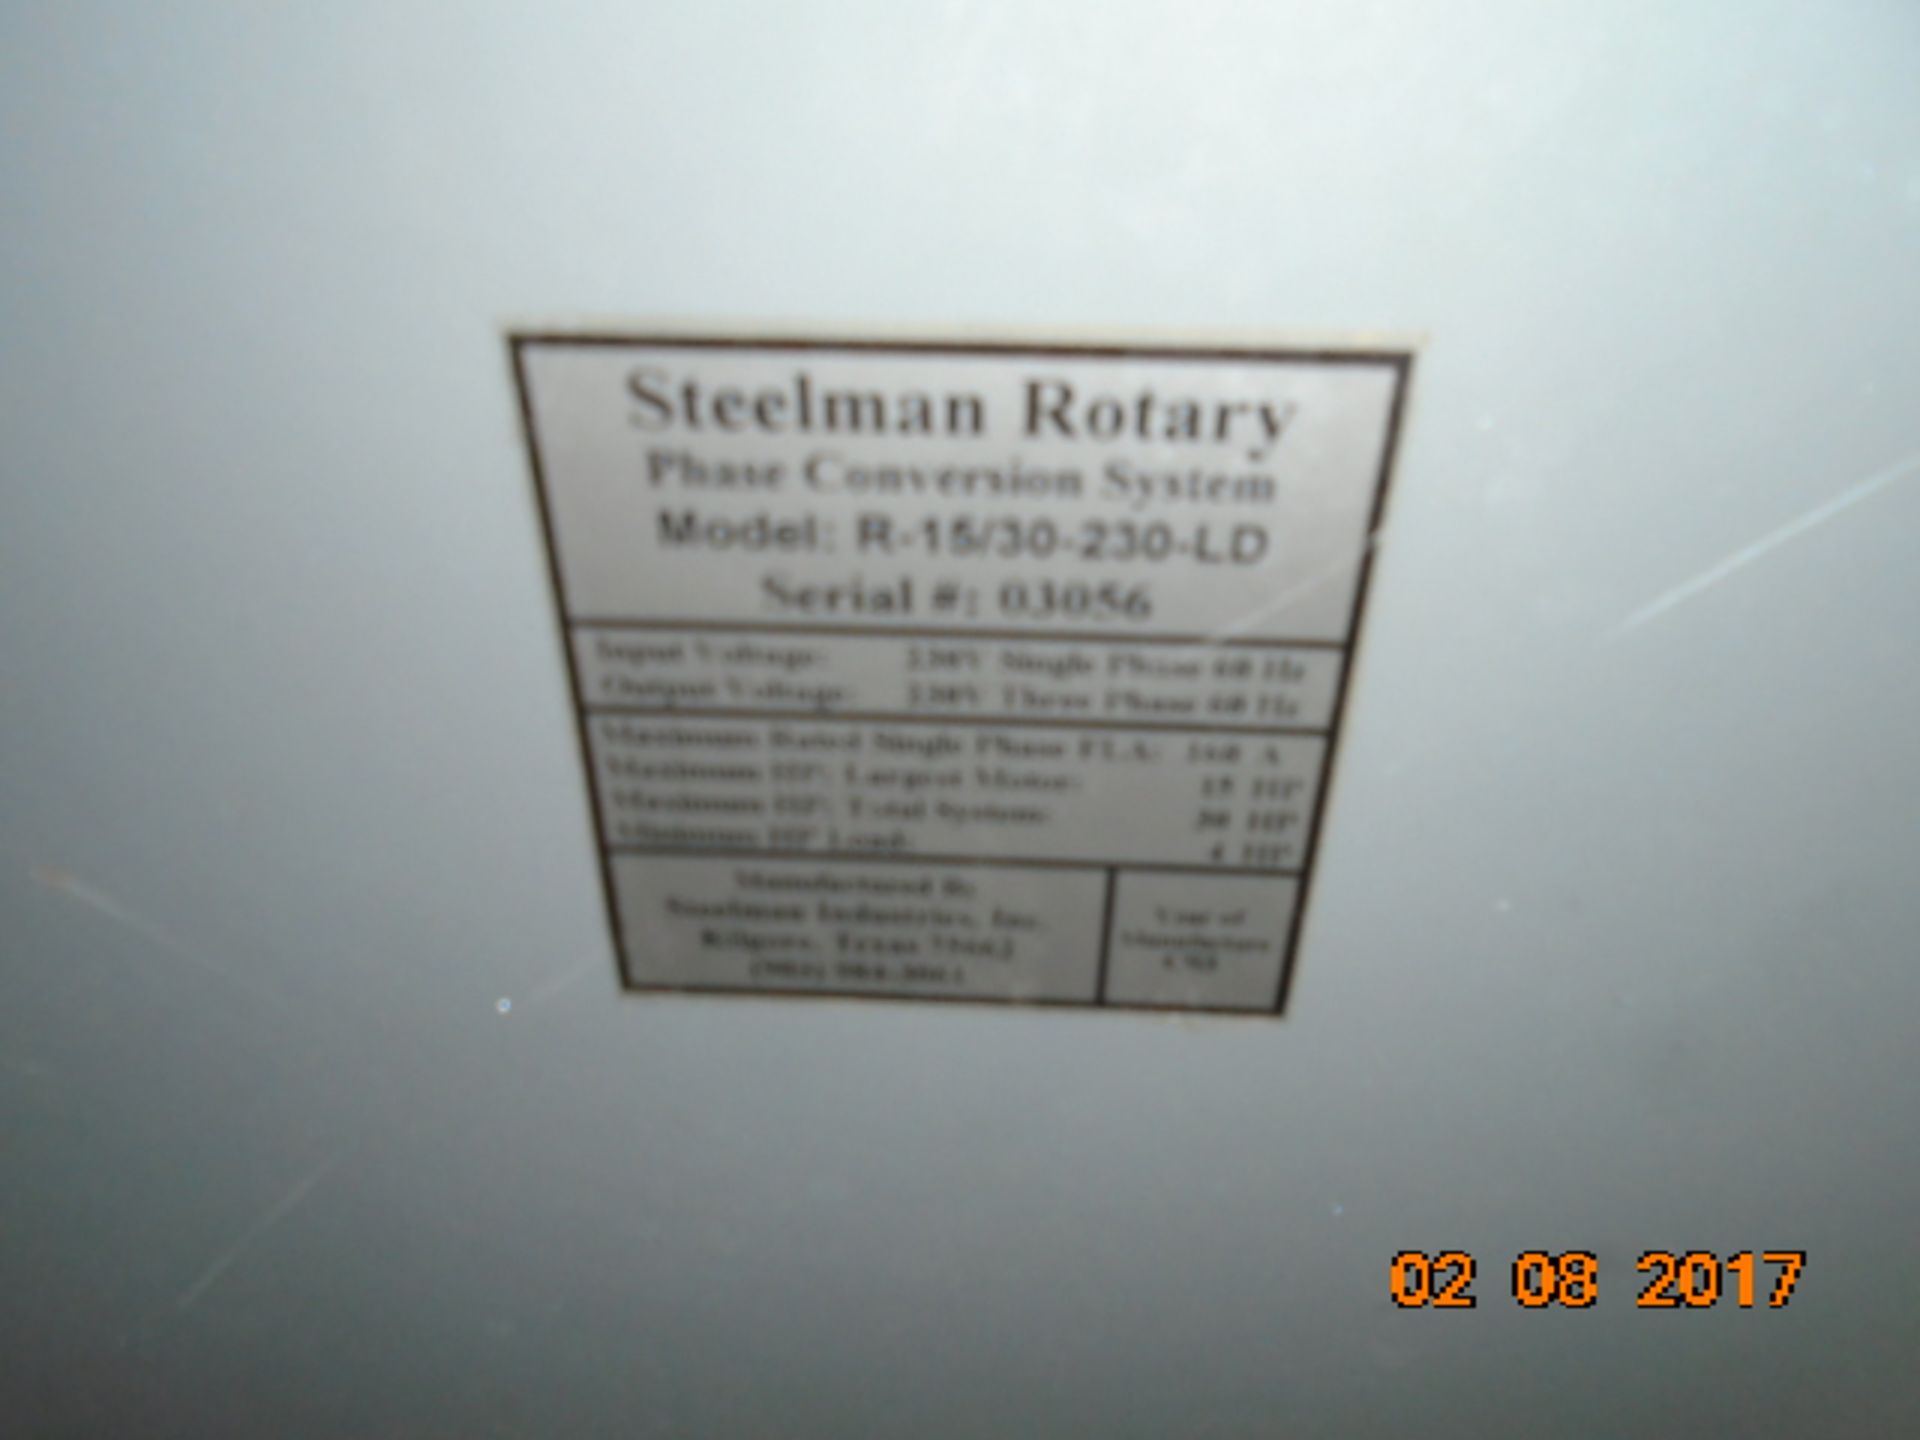 STEELMAN ROTARY PHASE CONVERTOR MDL. R-15/30-230-LD - Image 2 of 2